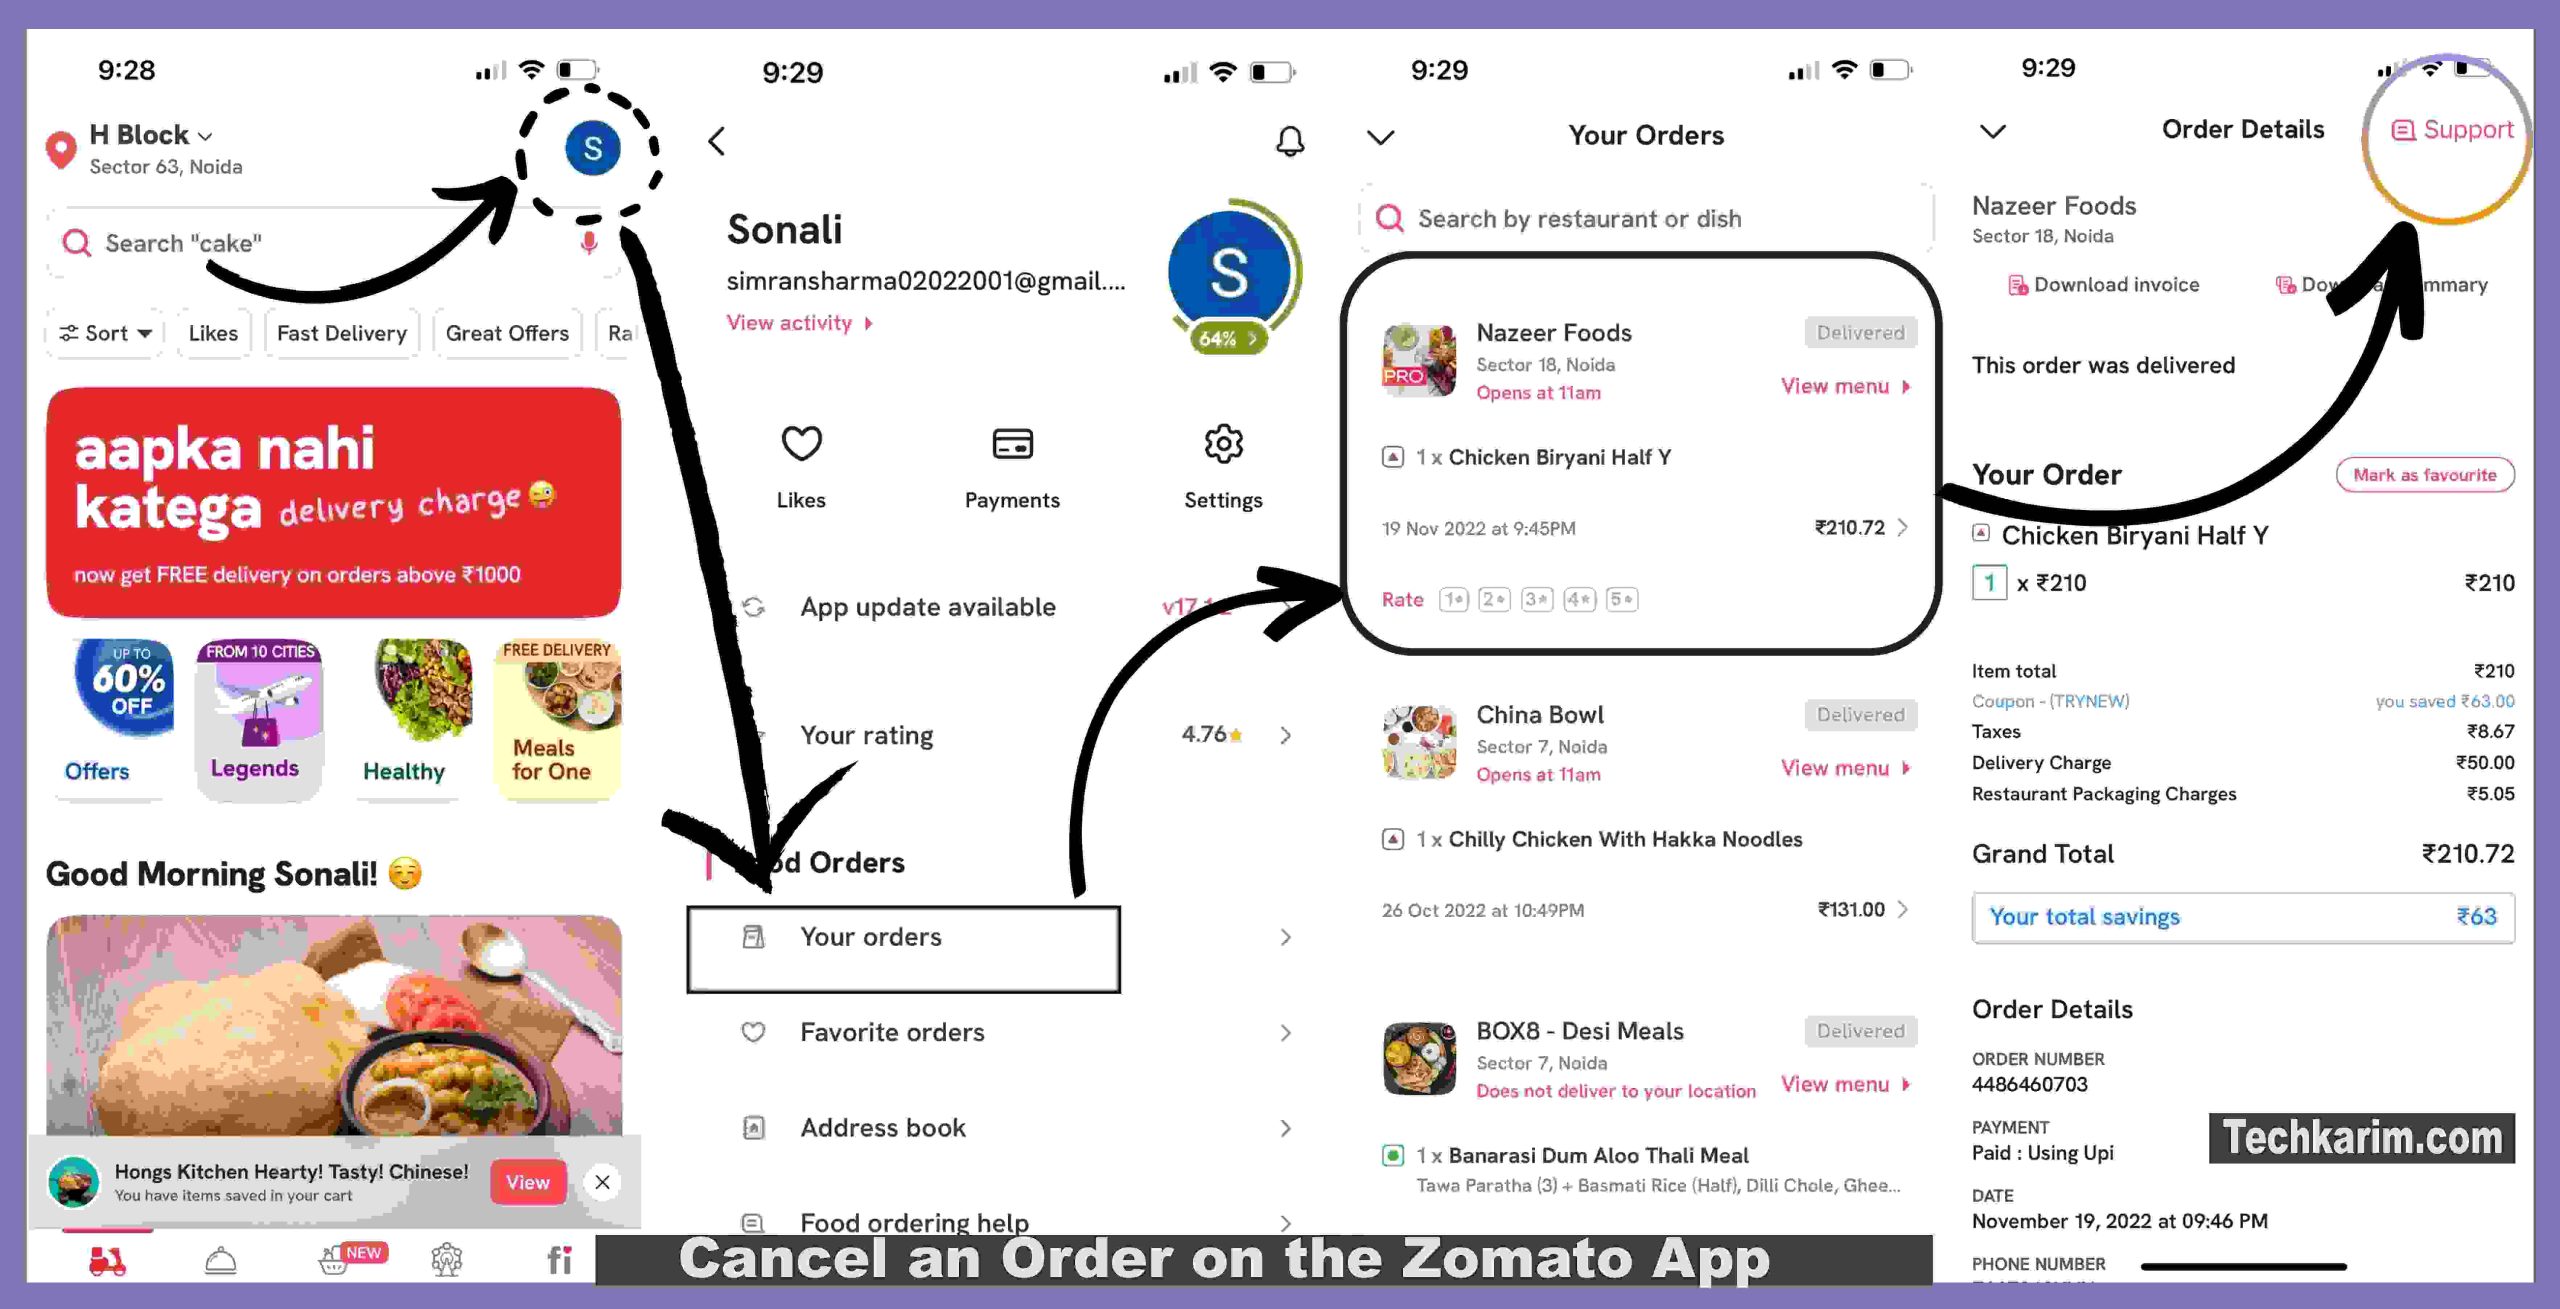 Cancel an Order on the Zomato App